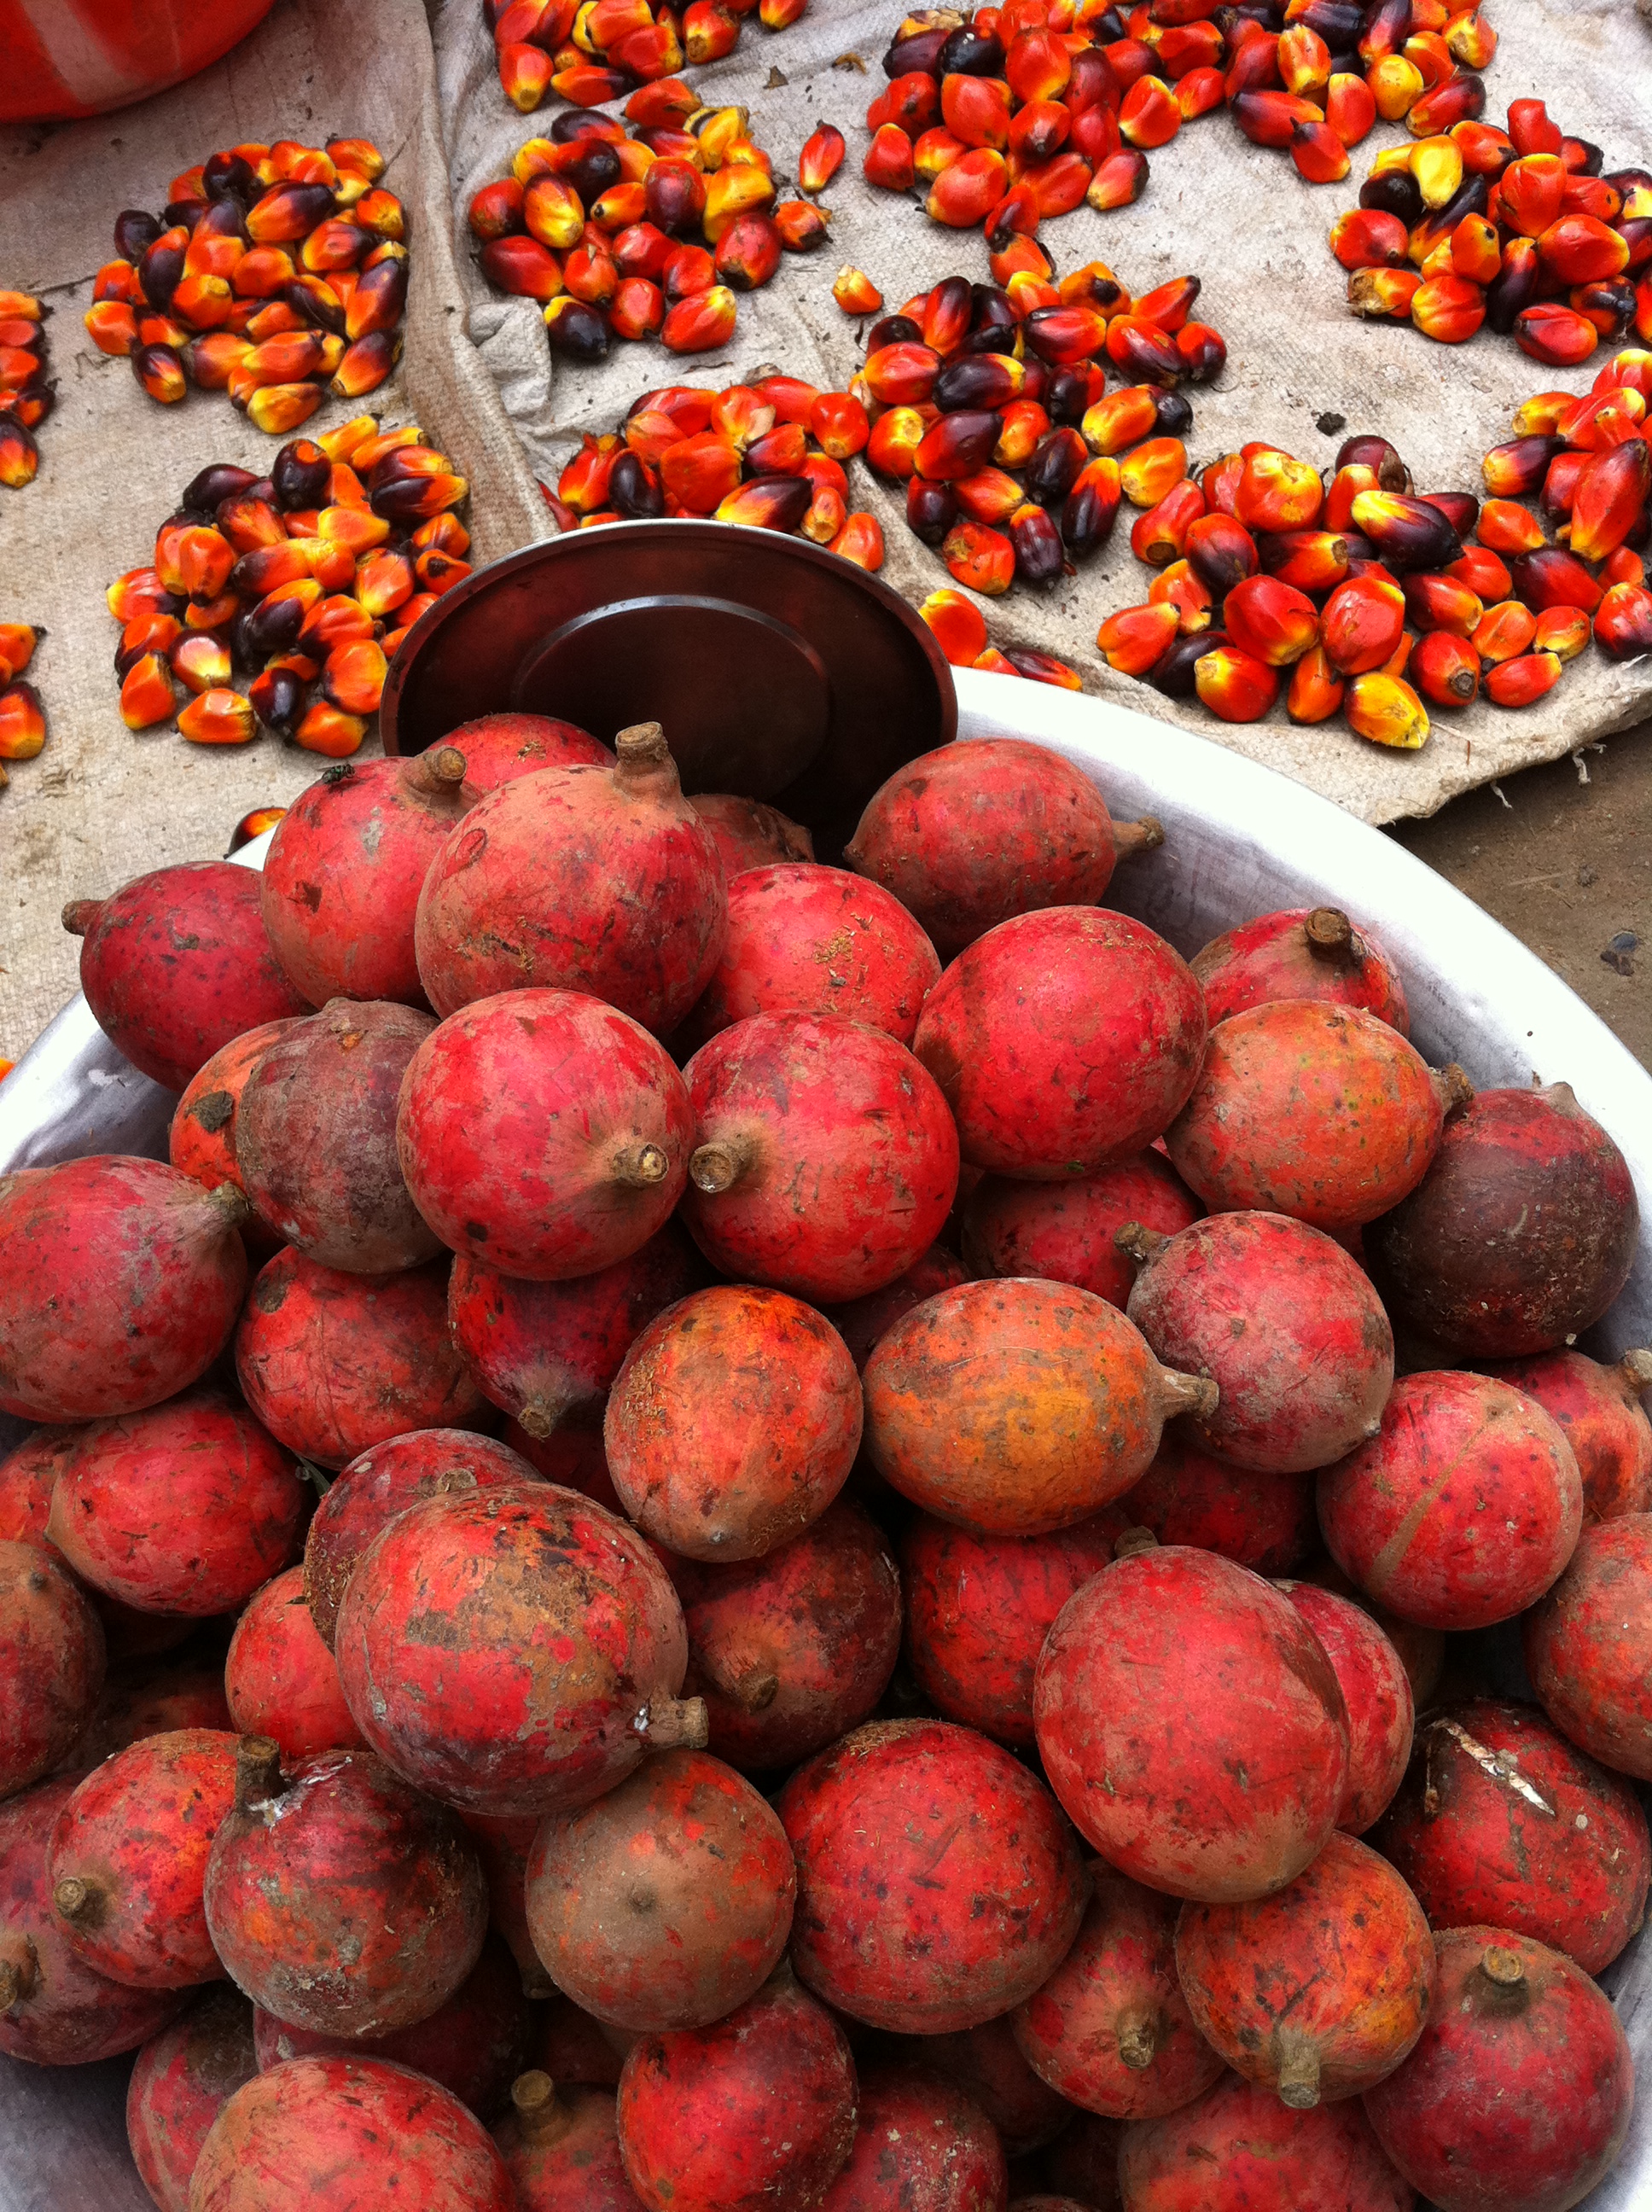 Palm oil nuts and fruits